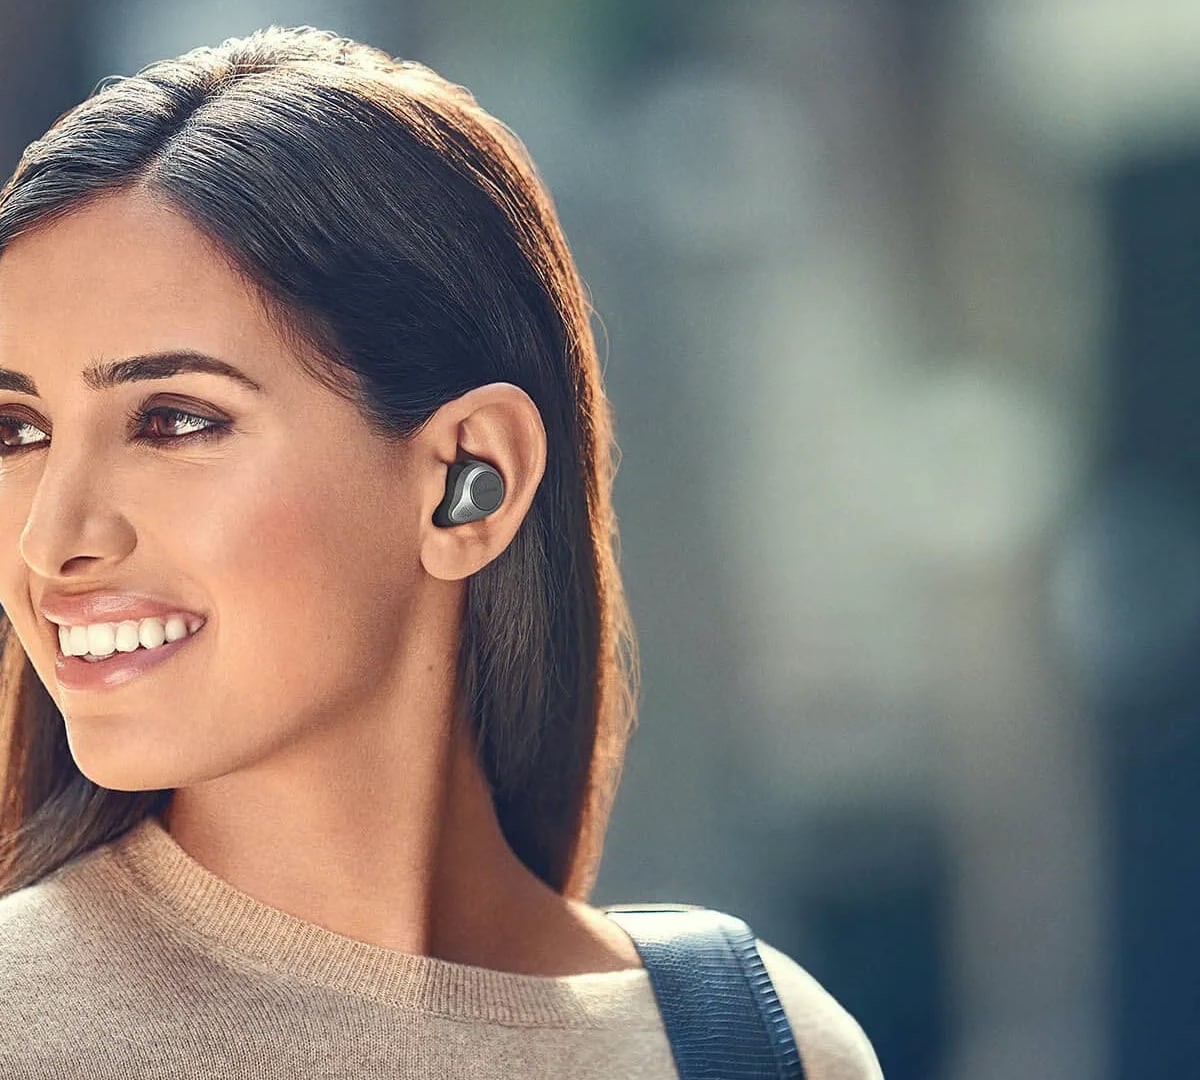 Jabra Elite 85t true wireless earbuds offer HearThrough mode for only sounds you want